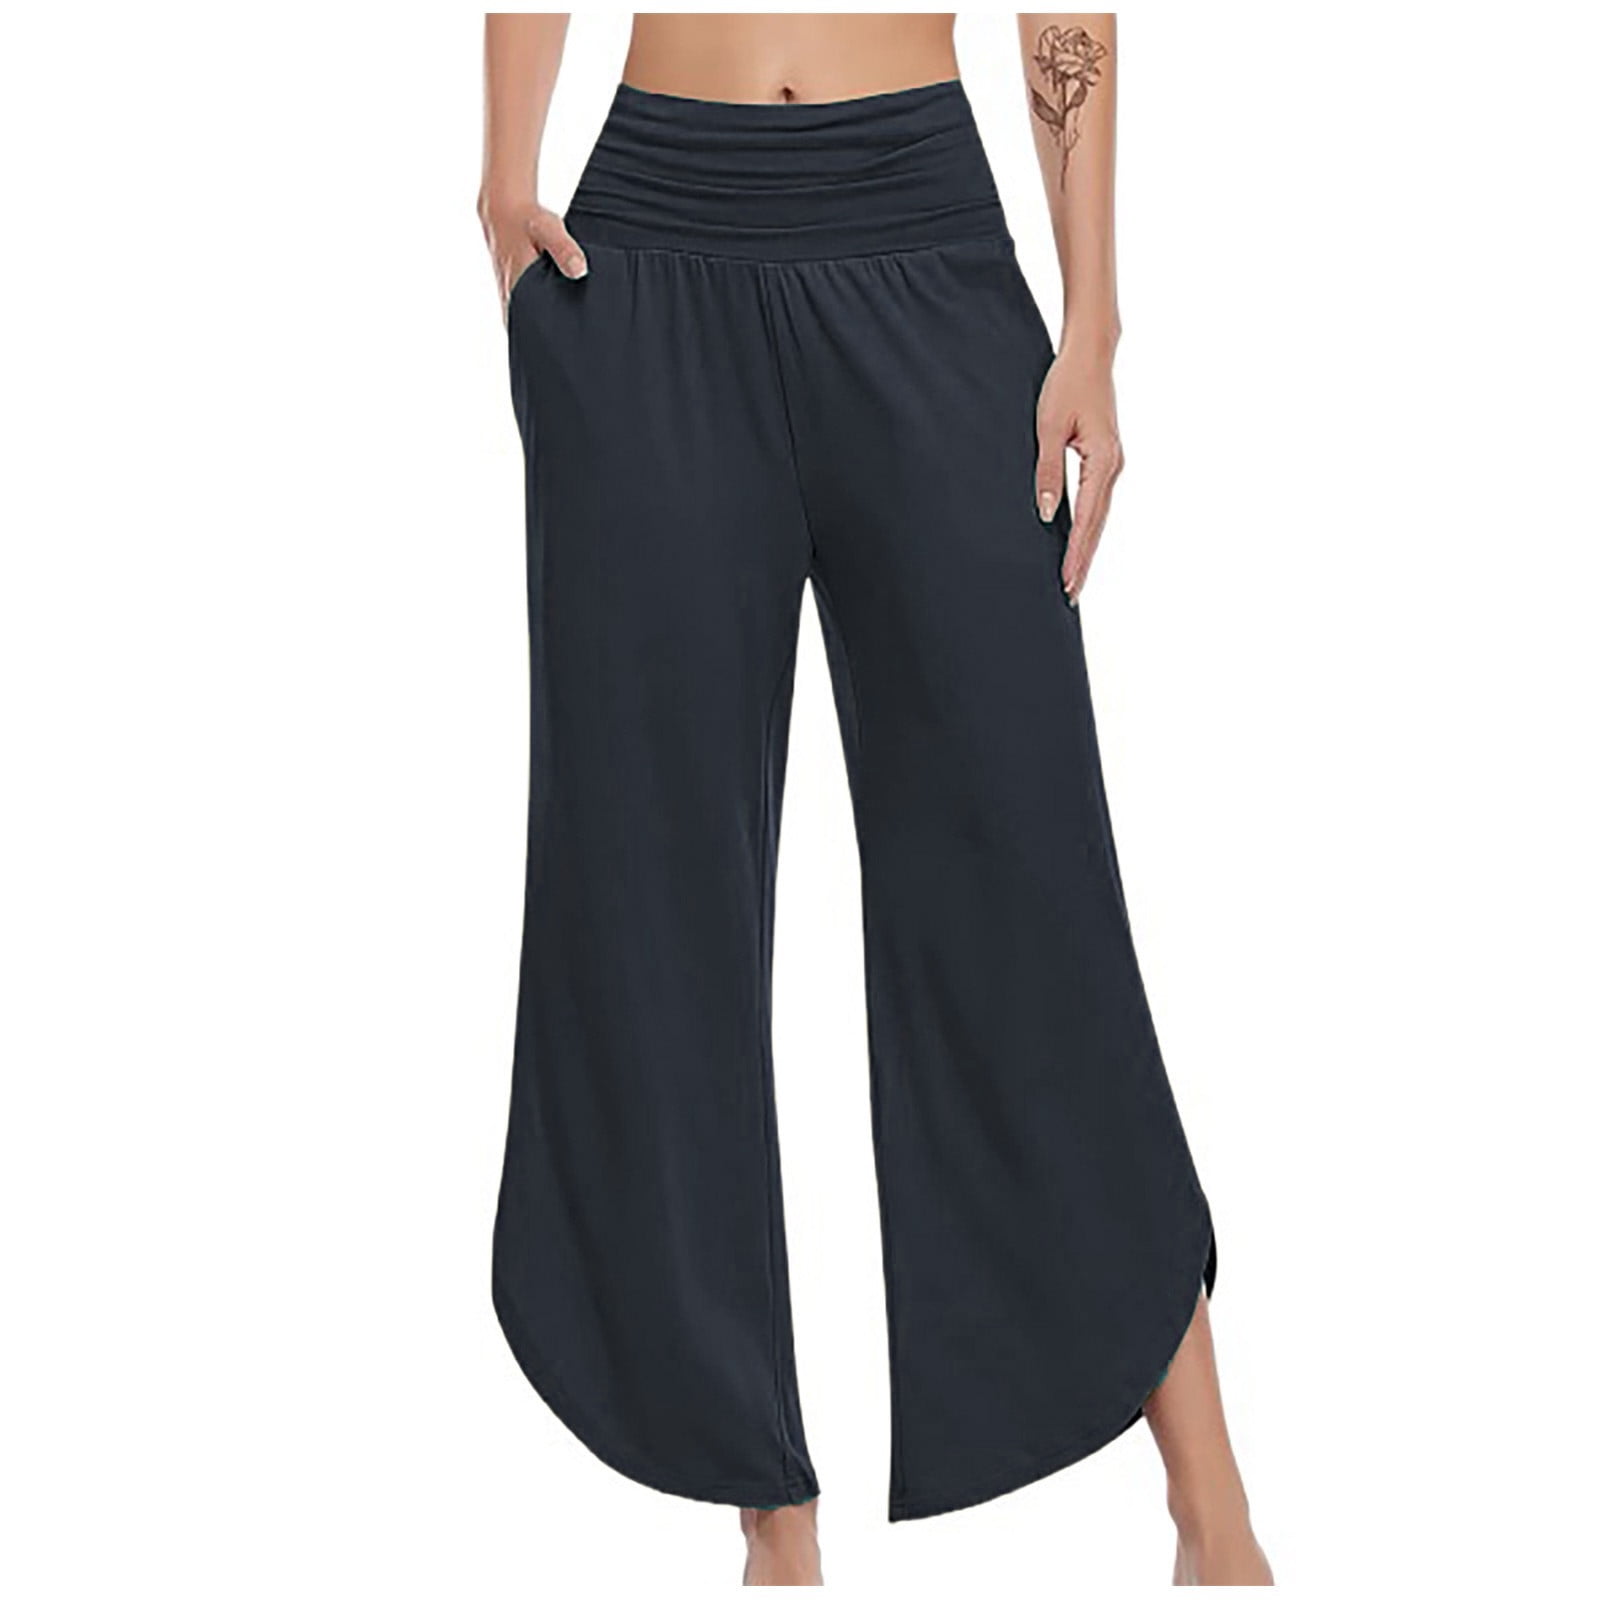 Gaecuw Palazzo Pants for Women Regular Fit Long Pants Pull On Lounge ...